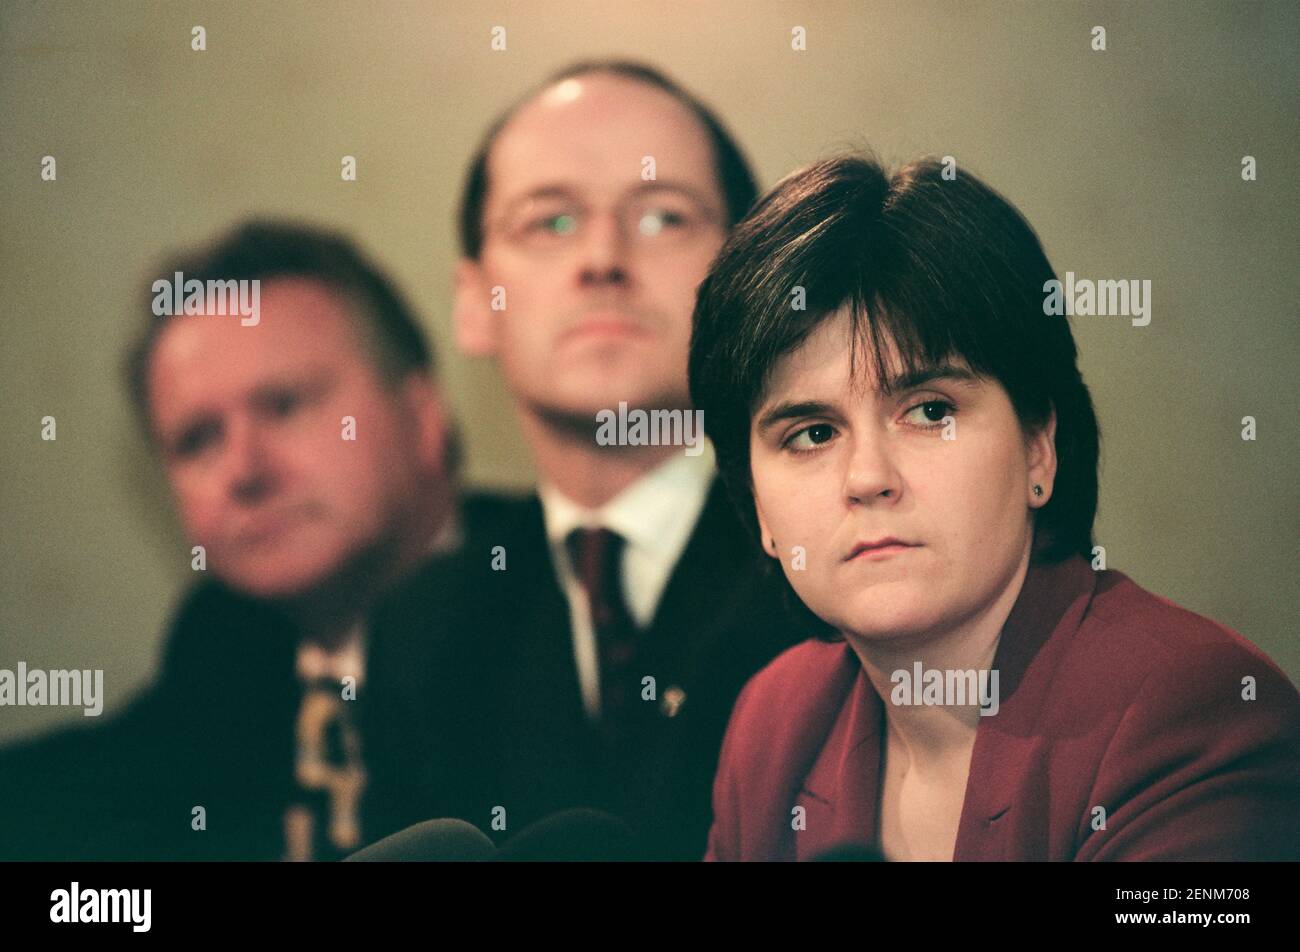 The Scottish National Party's Nicola Sturgeon (right) listening to her party leader Alex Salmond addressing the media at the launch of the SNP's 1999 manifesto for the Holyrood election campaign in Edinburgh, Scotland. Ms Sturgeon was elected to the newly-created Scottish parliament in 1999 and went on to serve as the country's Deputy First Minister under Alex Salmond MSP and then as First Minister. At the time of the 1999 election she was working as a solicitor in the Drumchapel Law and Money Advice Centre in Glasgow. Stock Photo